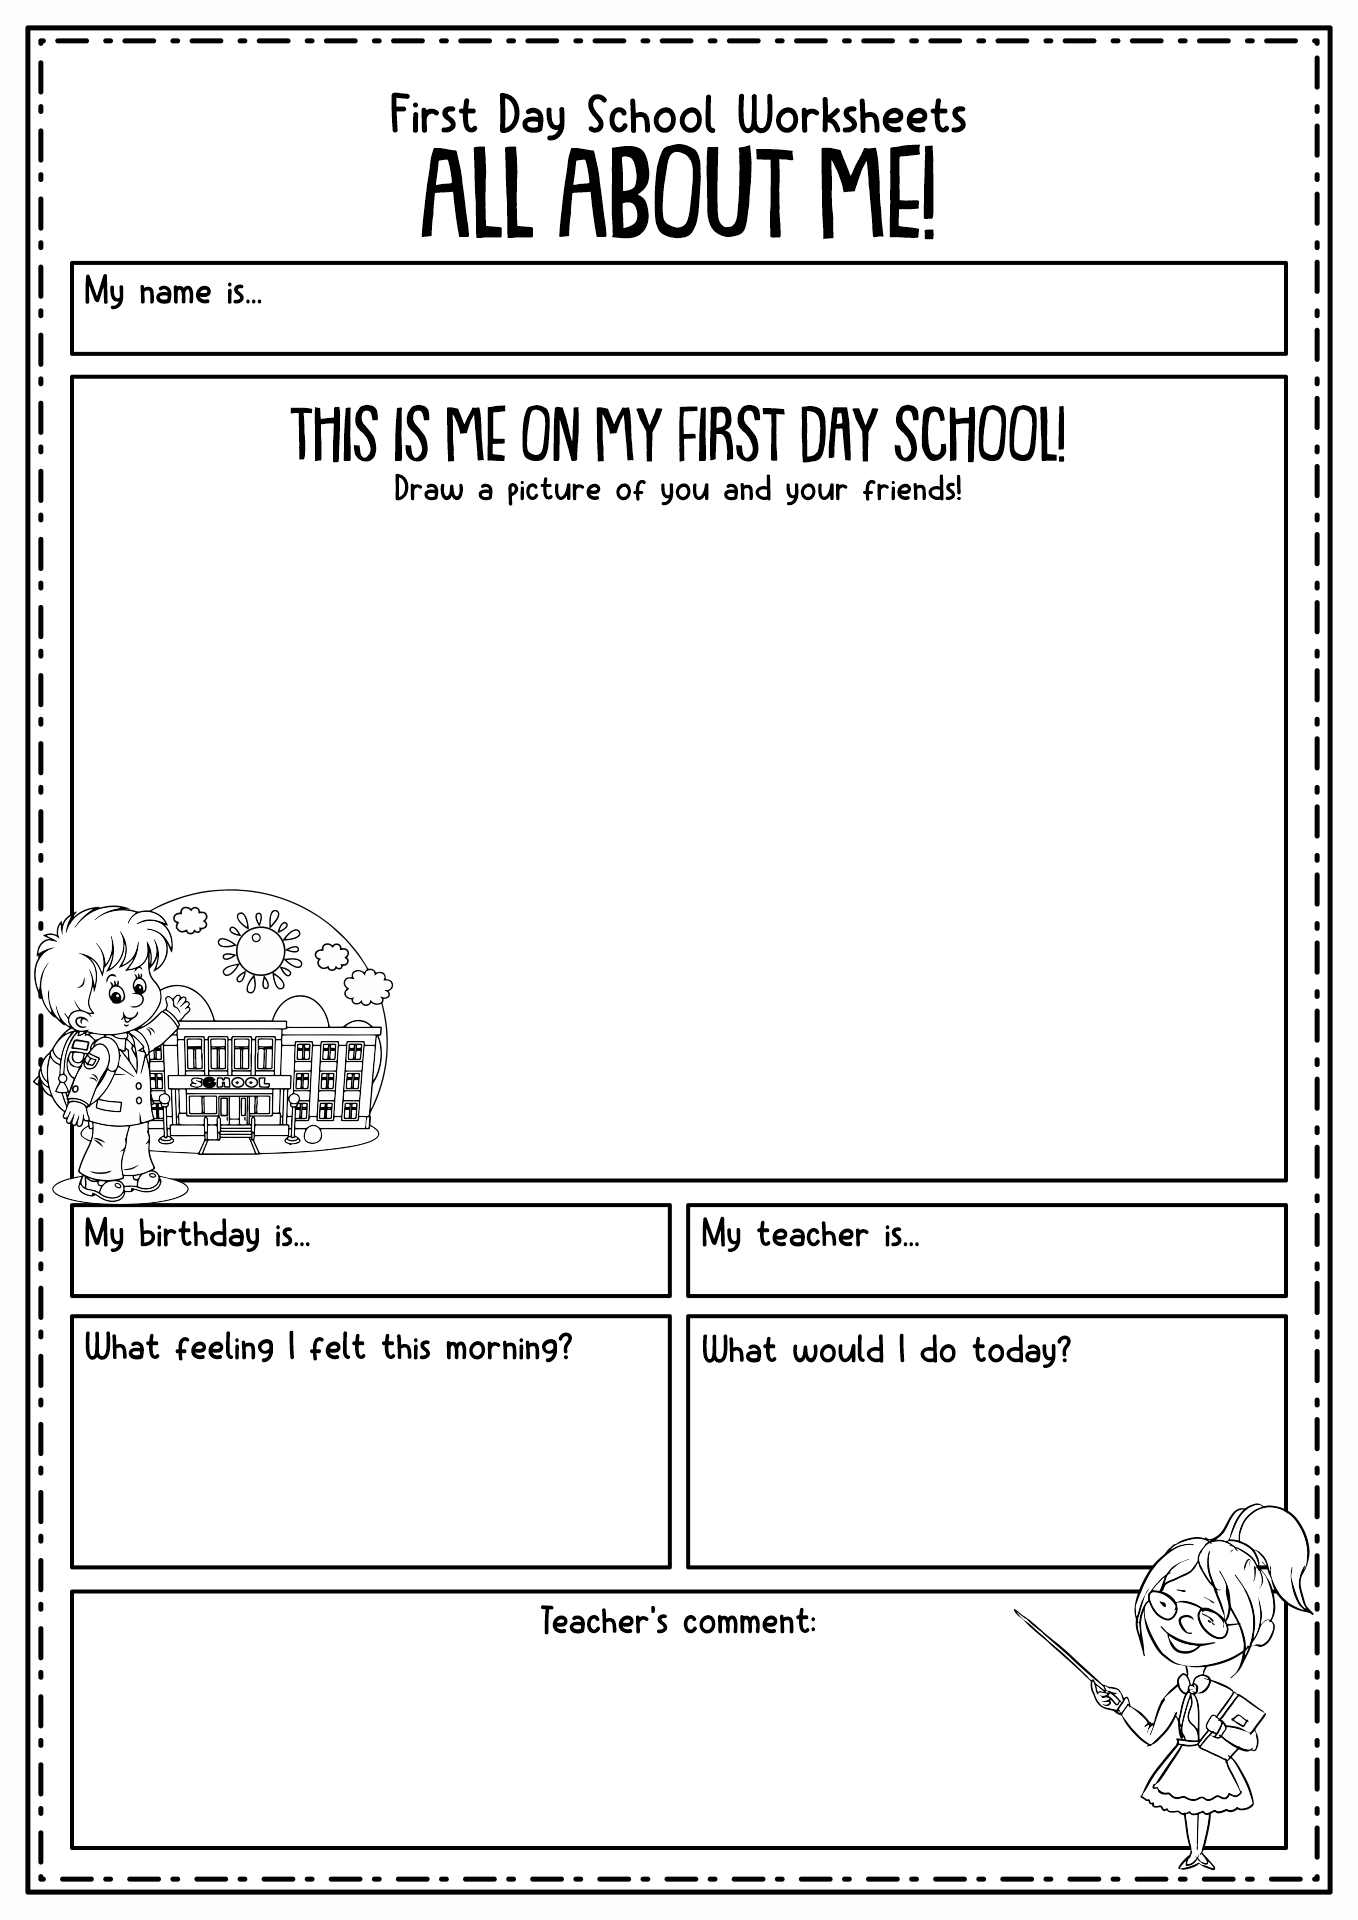 My First Day of School Worksheet Image